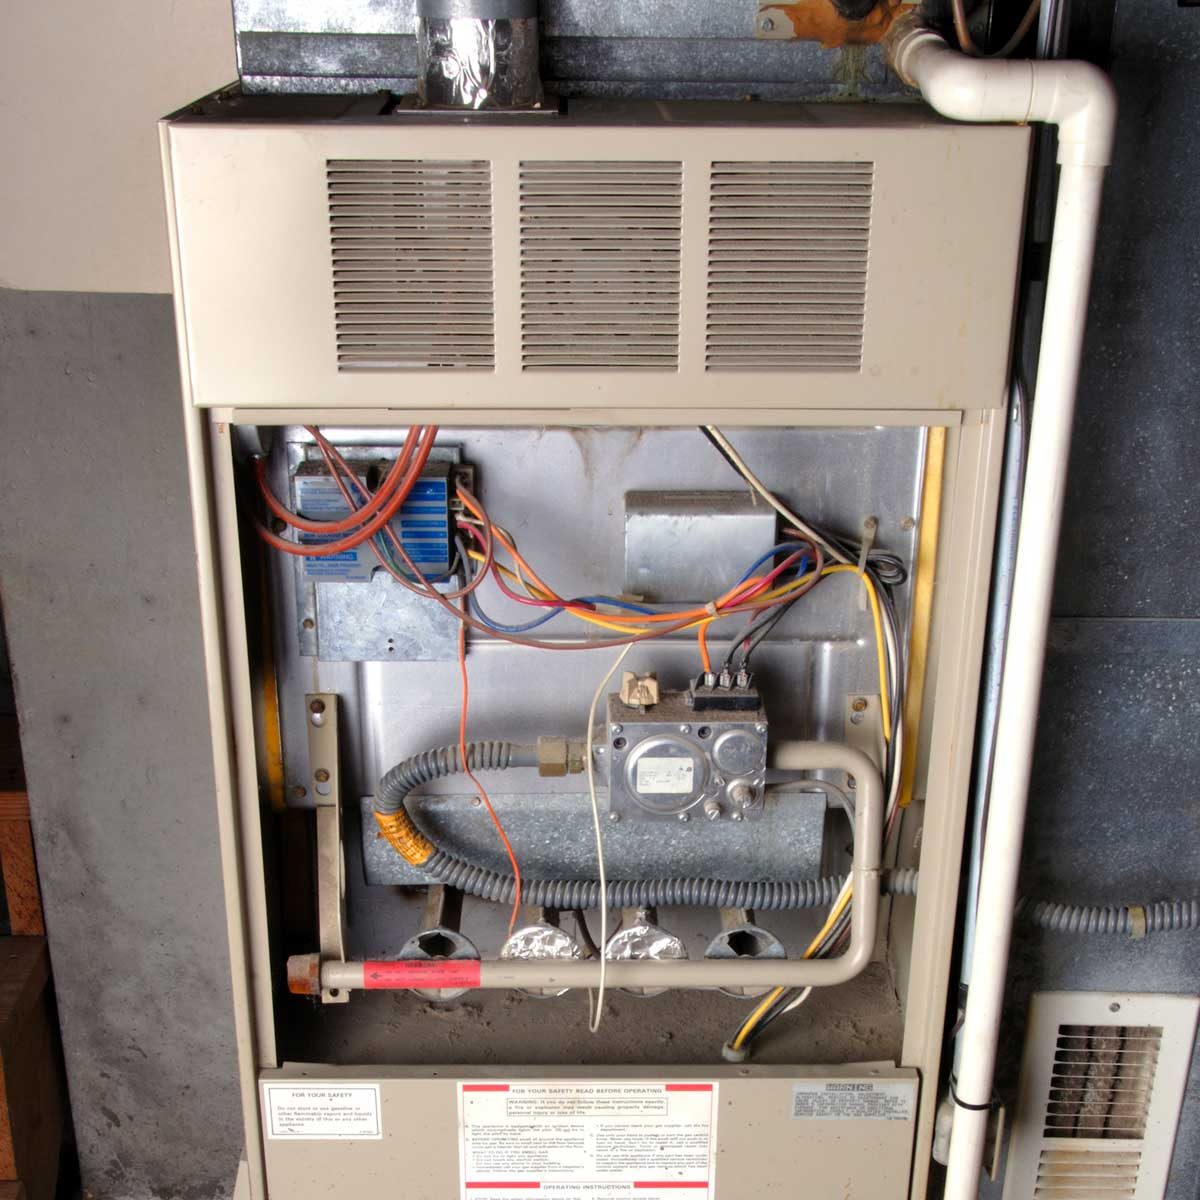 13 Silent Signs Your Furnace Needs Repair